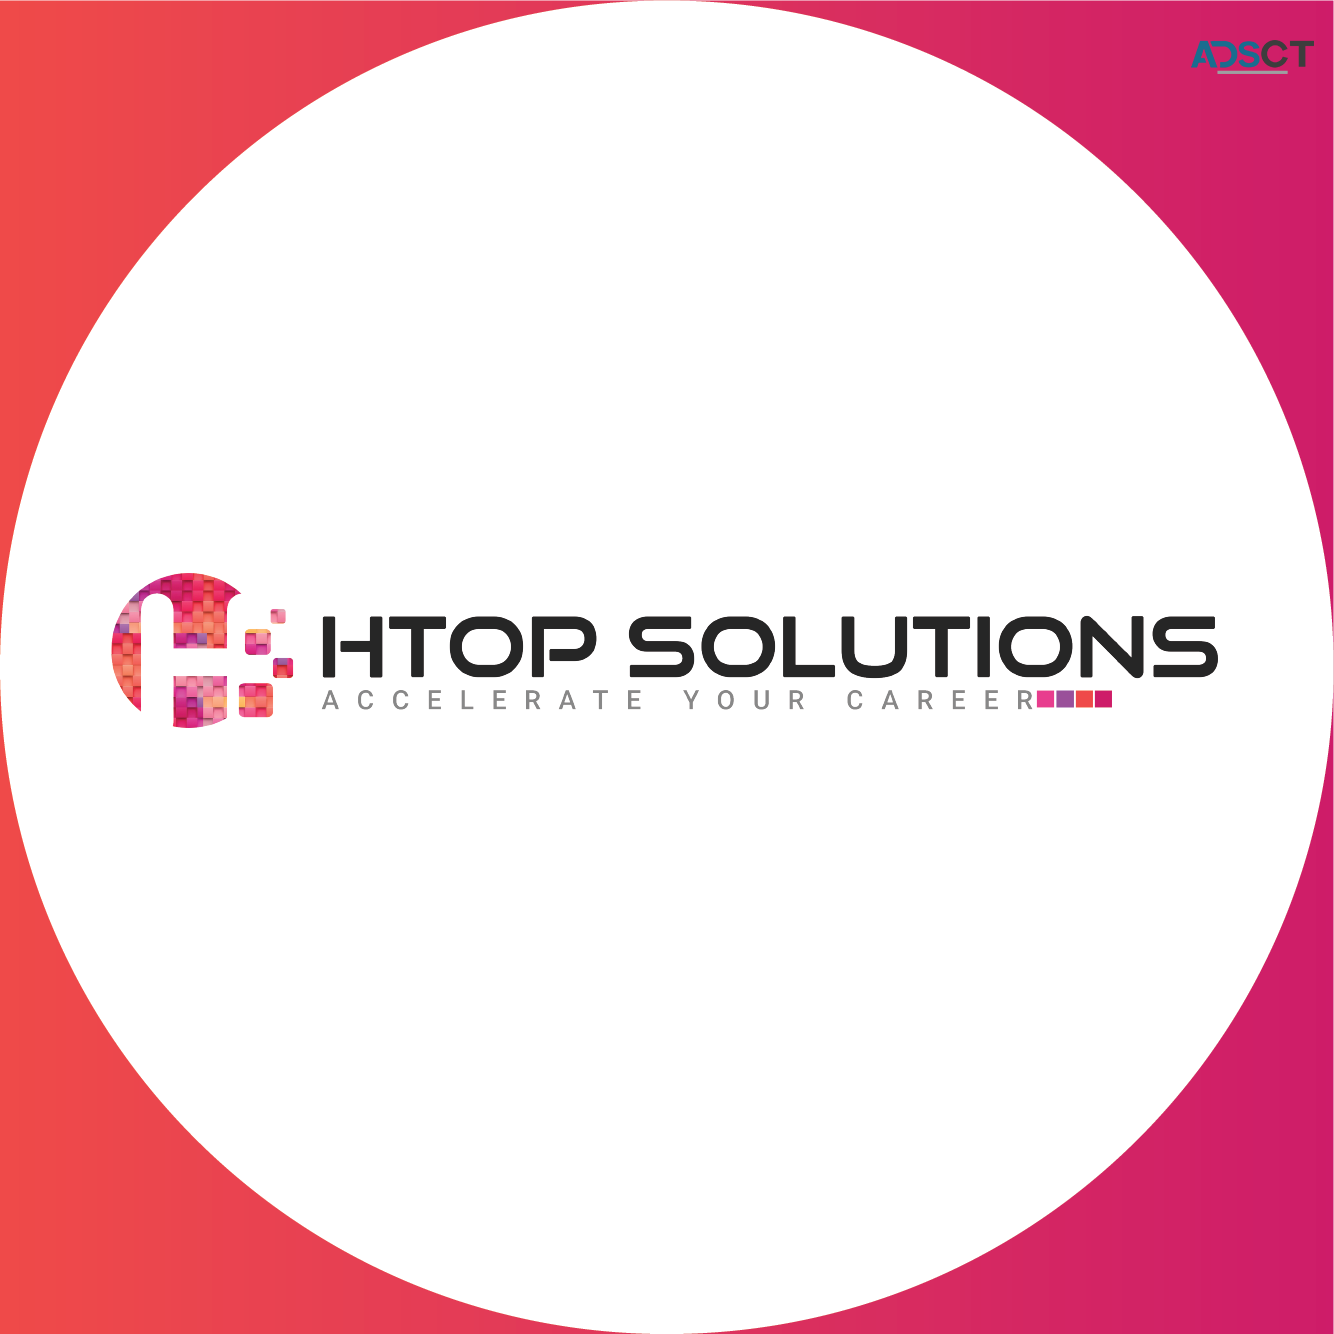 Best Software Training Institute in Chennai - Htop Solutions